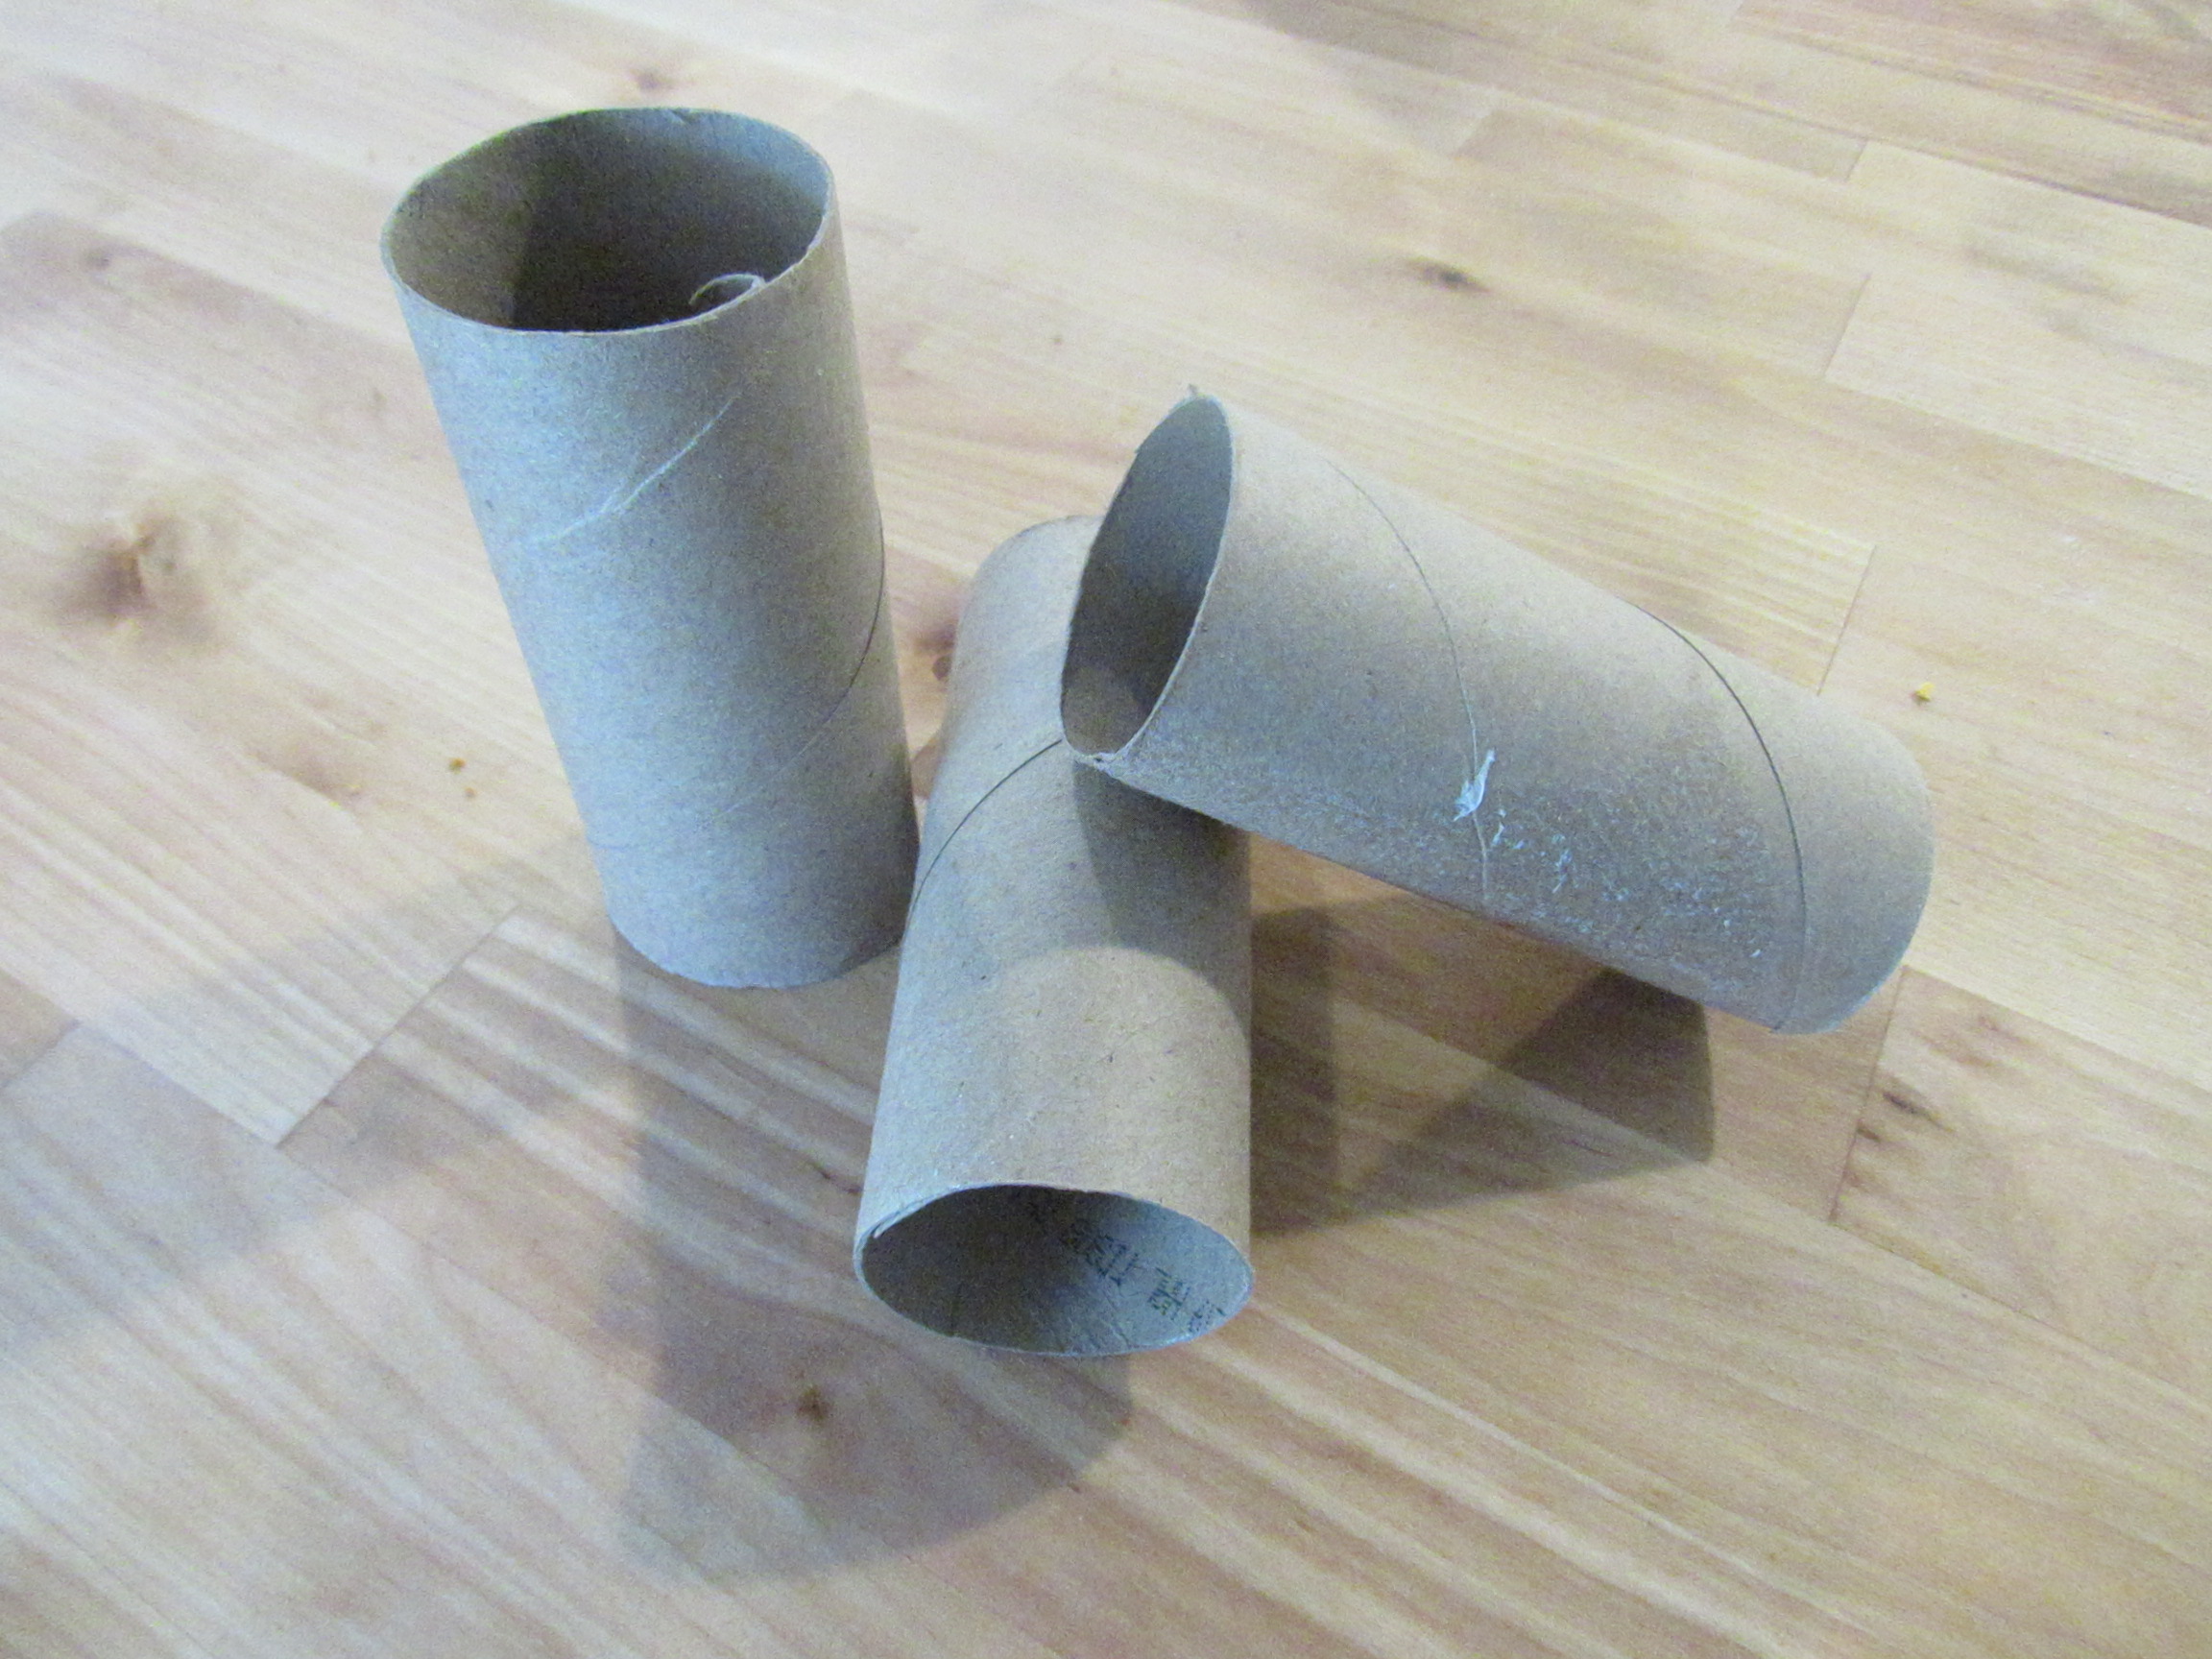 How to upcycle toilet paper rolls